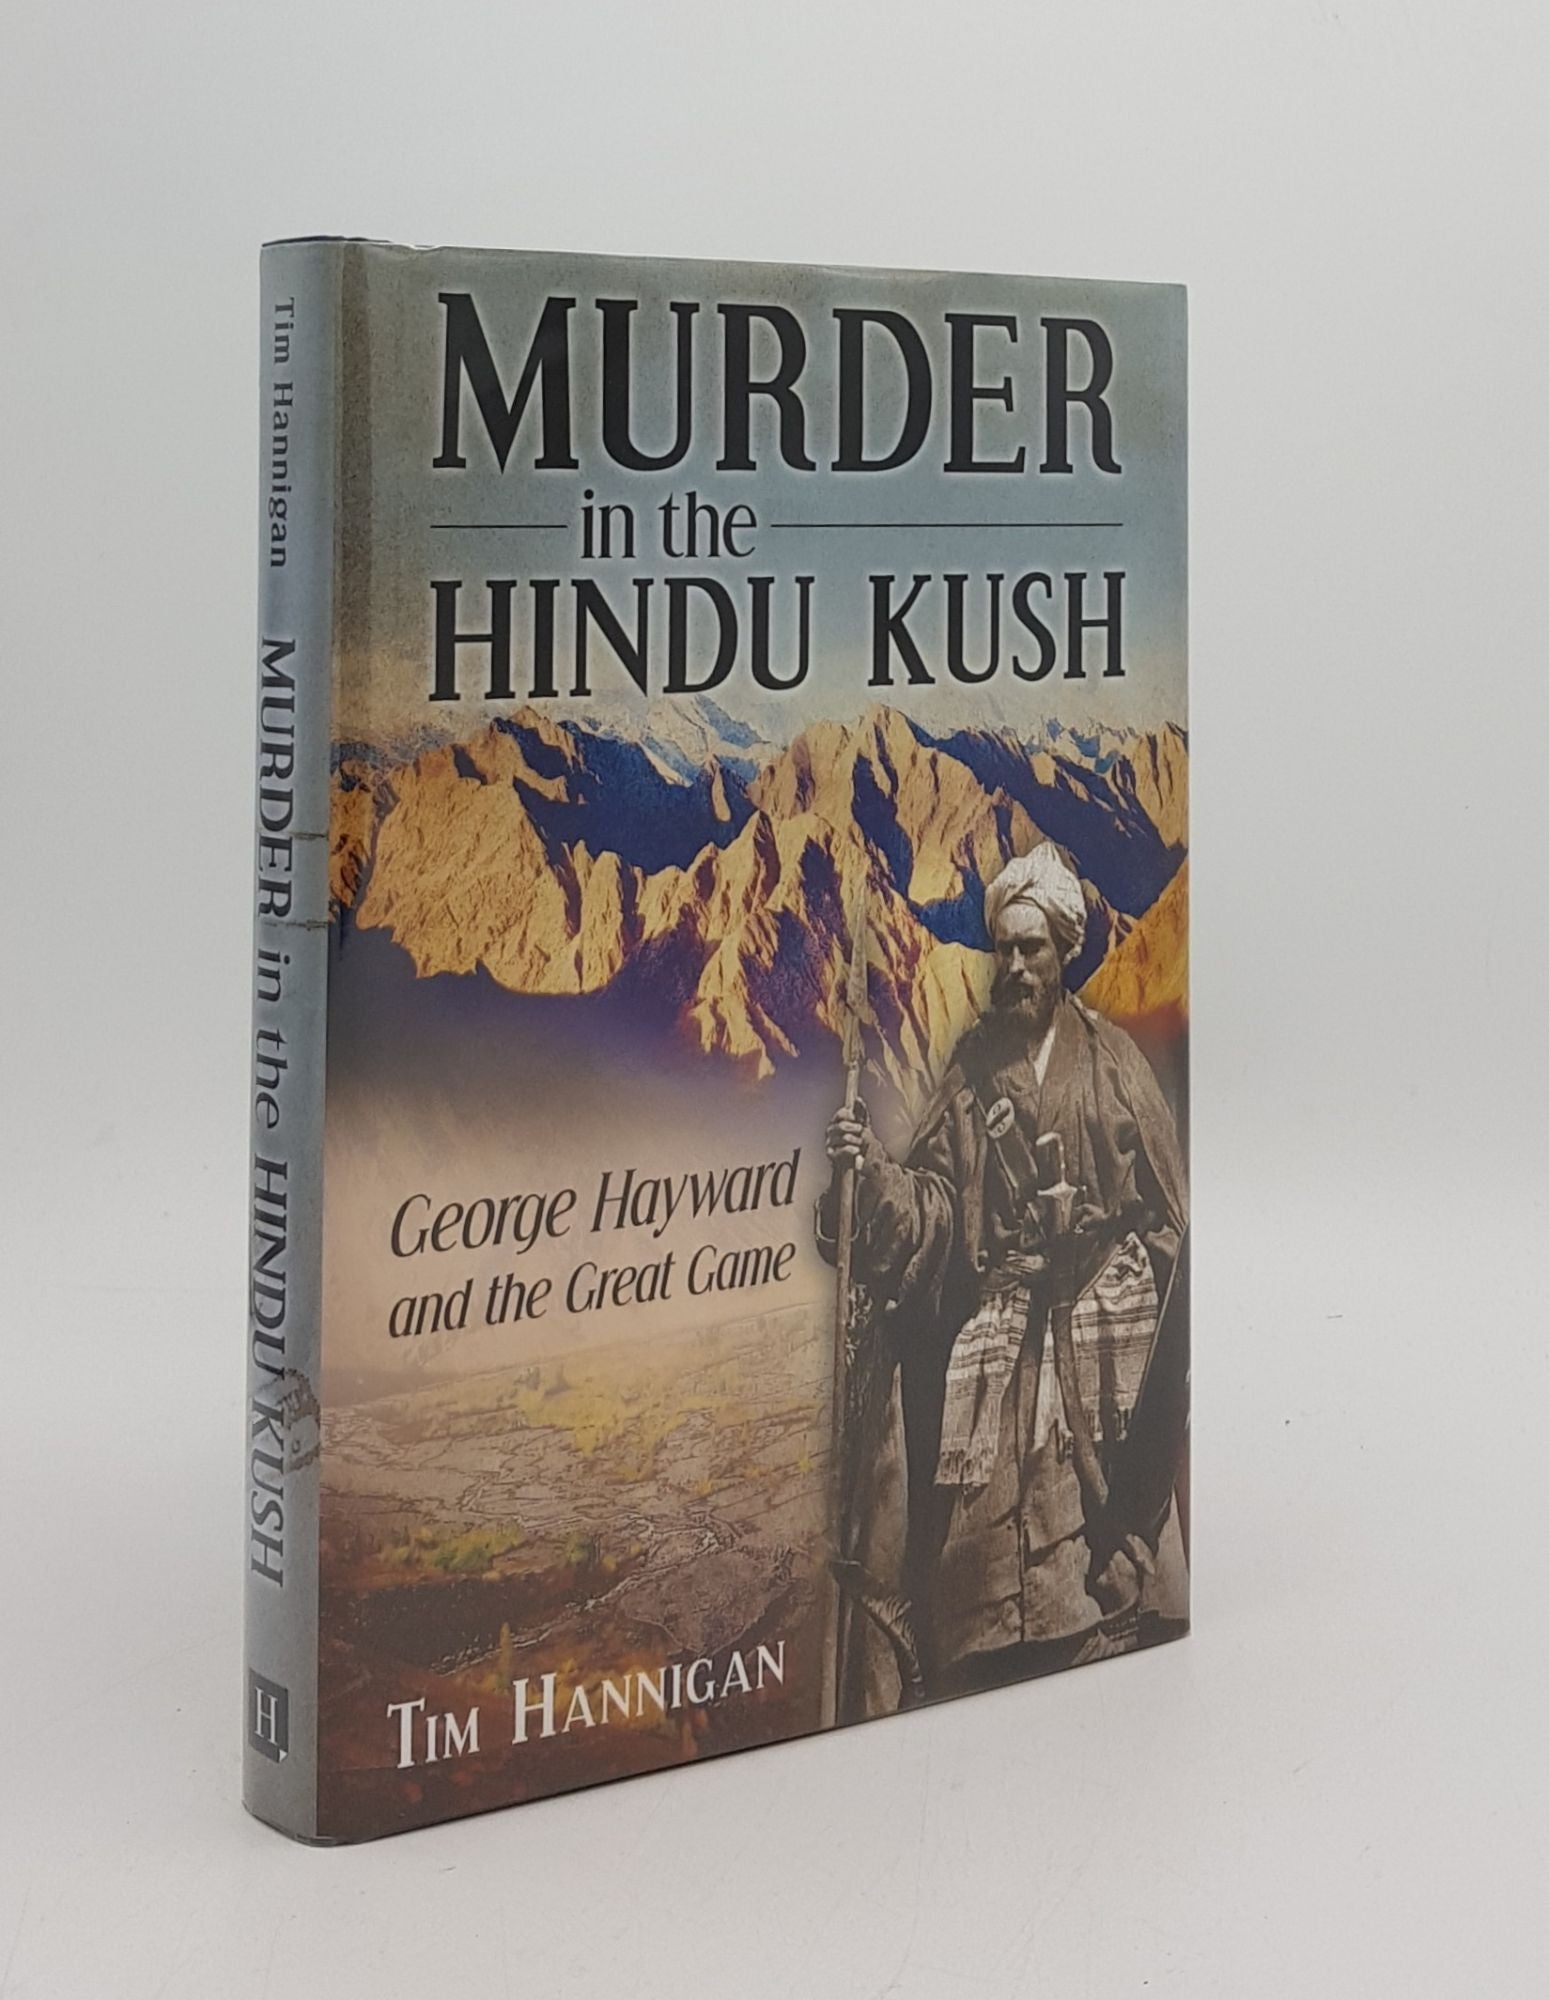 HANNIGAN Tim - Murder in the Hindu Kush George Hayward and the Great Game